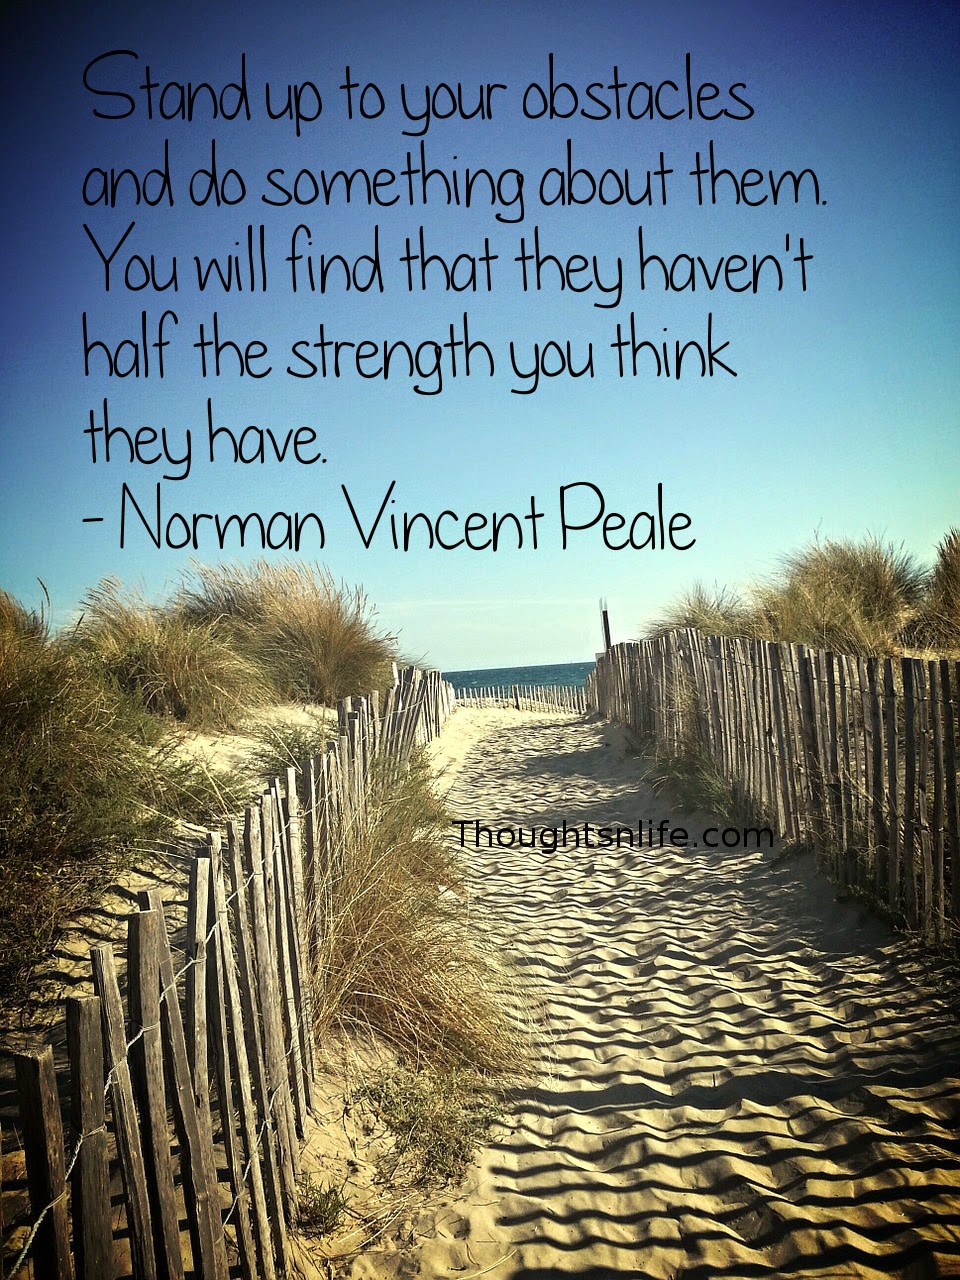 Thoughtsnlife.com:Stand up to your obstacles and do something about them. You will find that they haven't half the strength you think they have. - Norman Vincent Peale